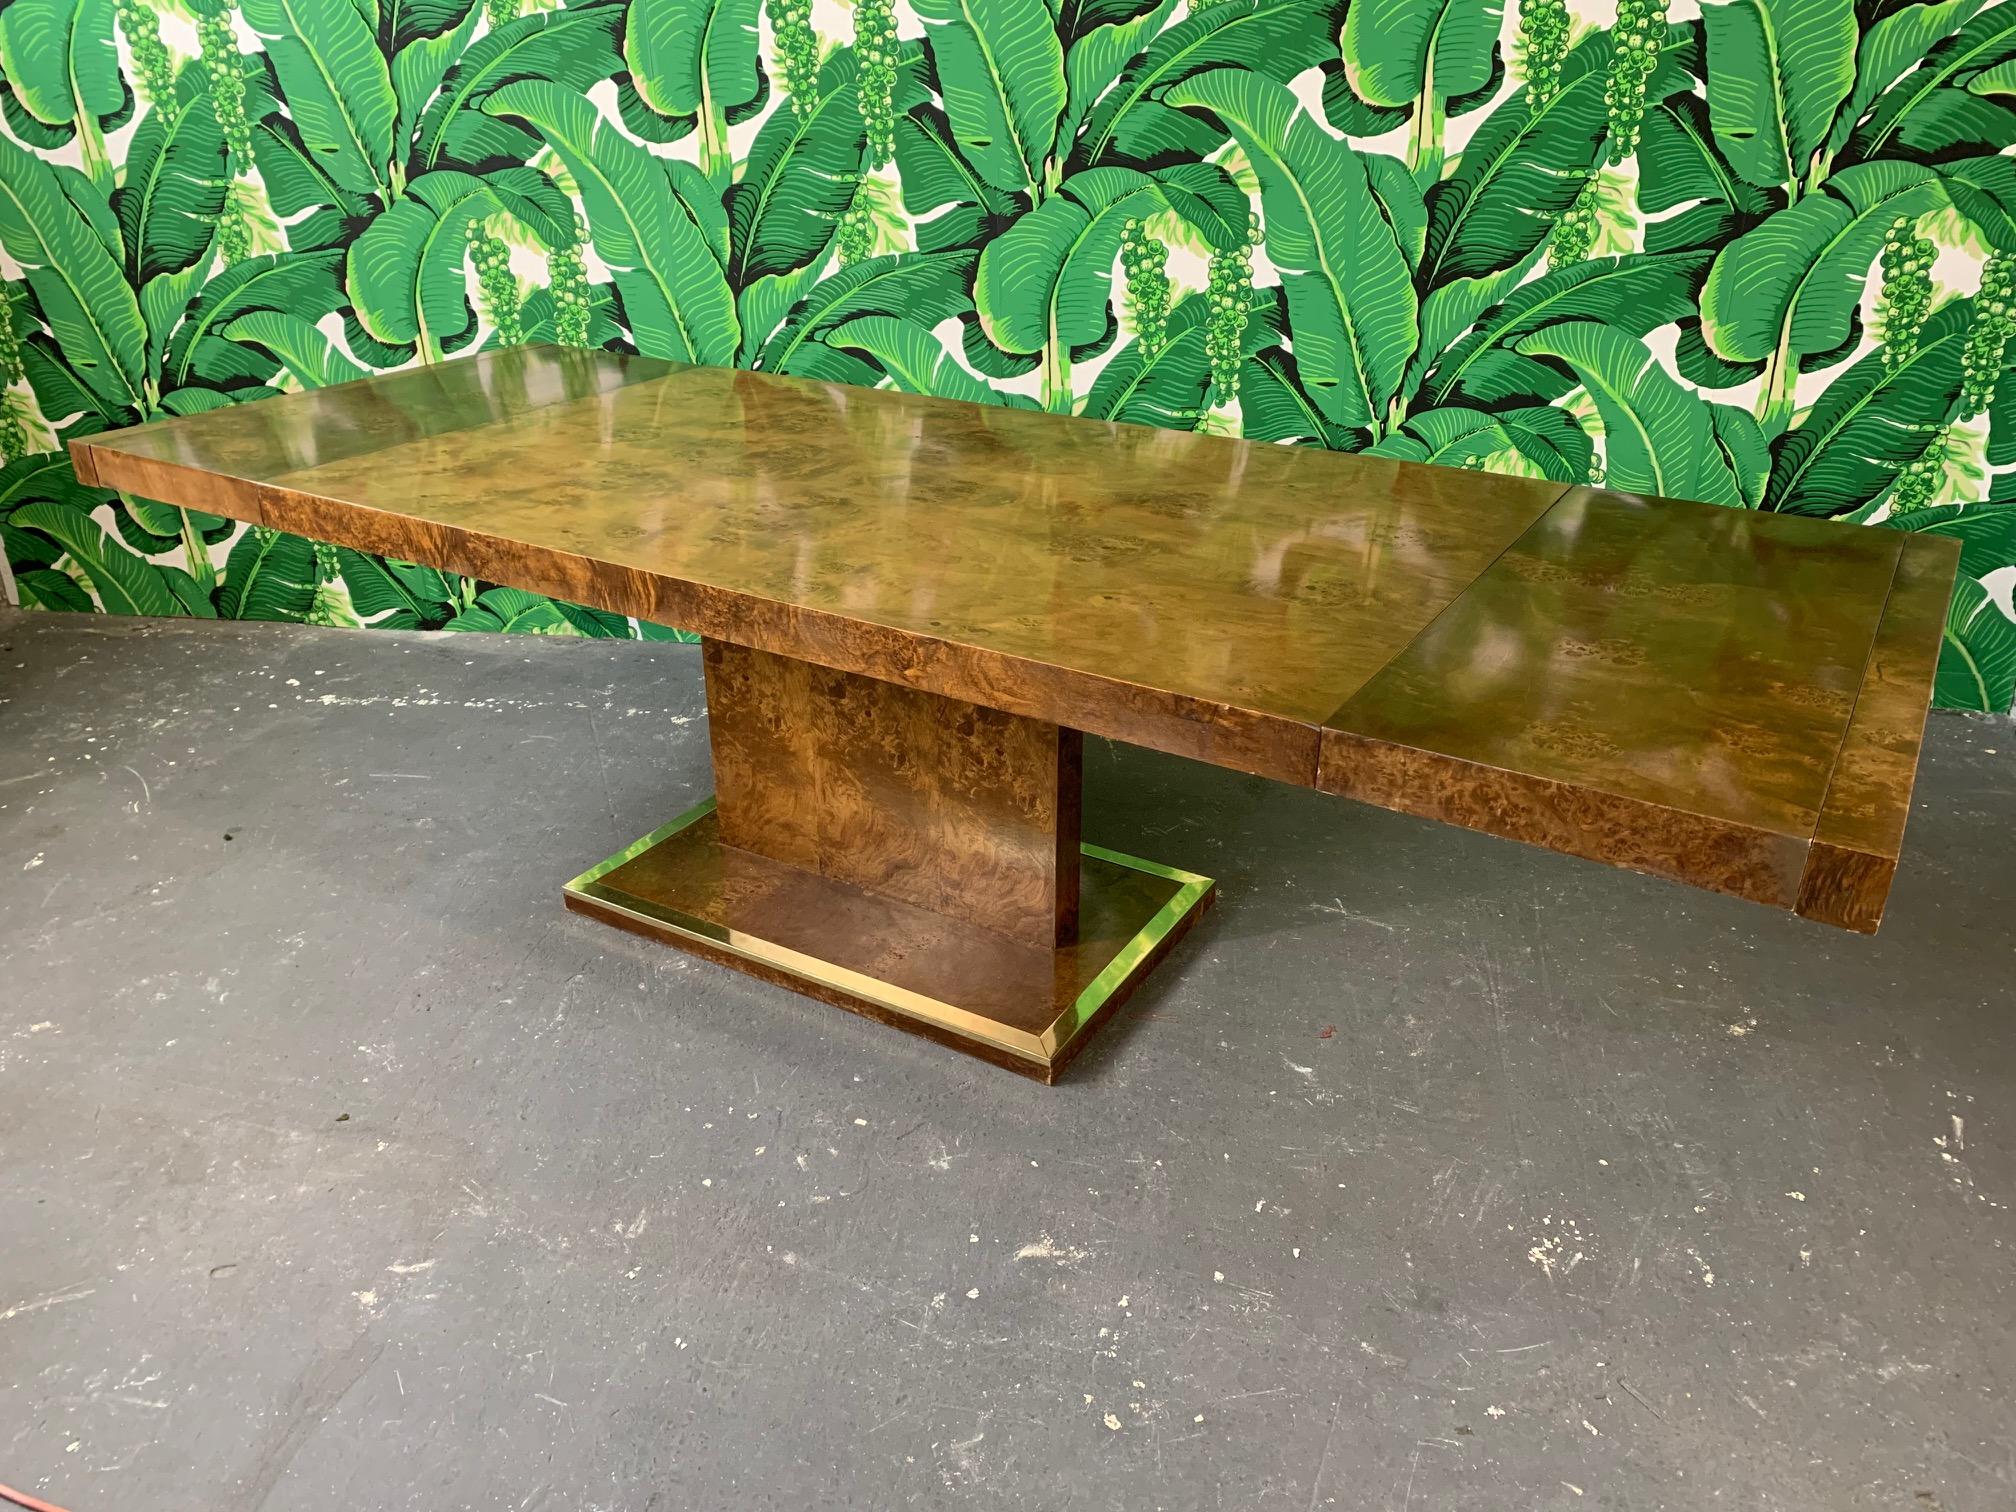 Burled elmwood dining table by Founders furniture for Thomasville, circa 1975. Includes two leaves, full table pads, and protective leaf storage covers. Each leaf measures 16.25